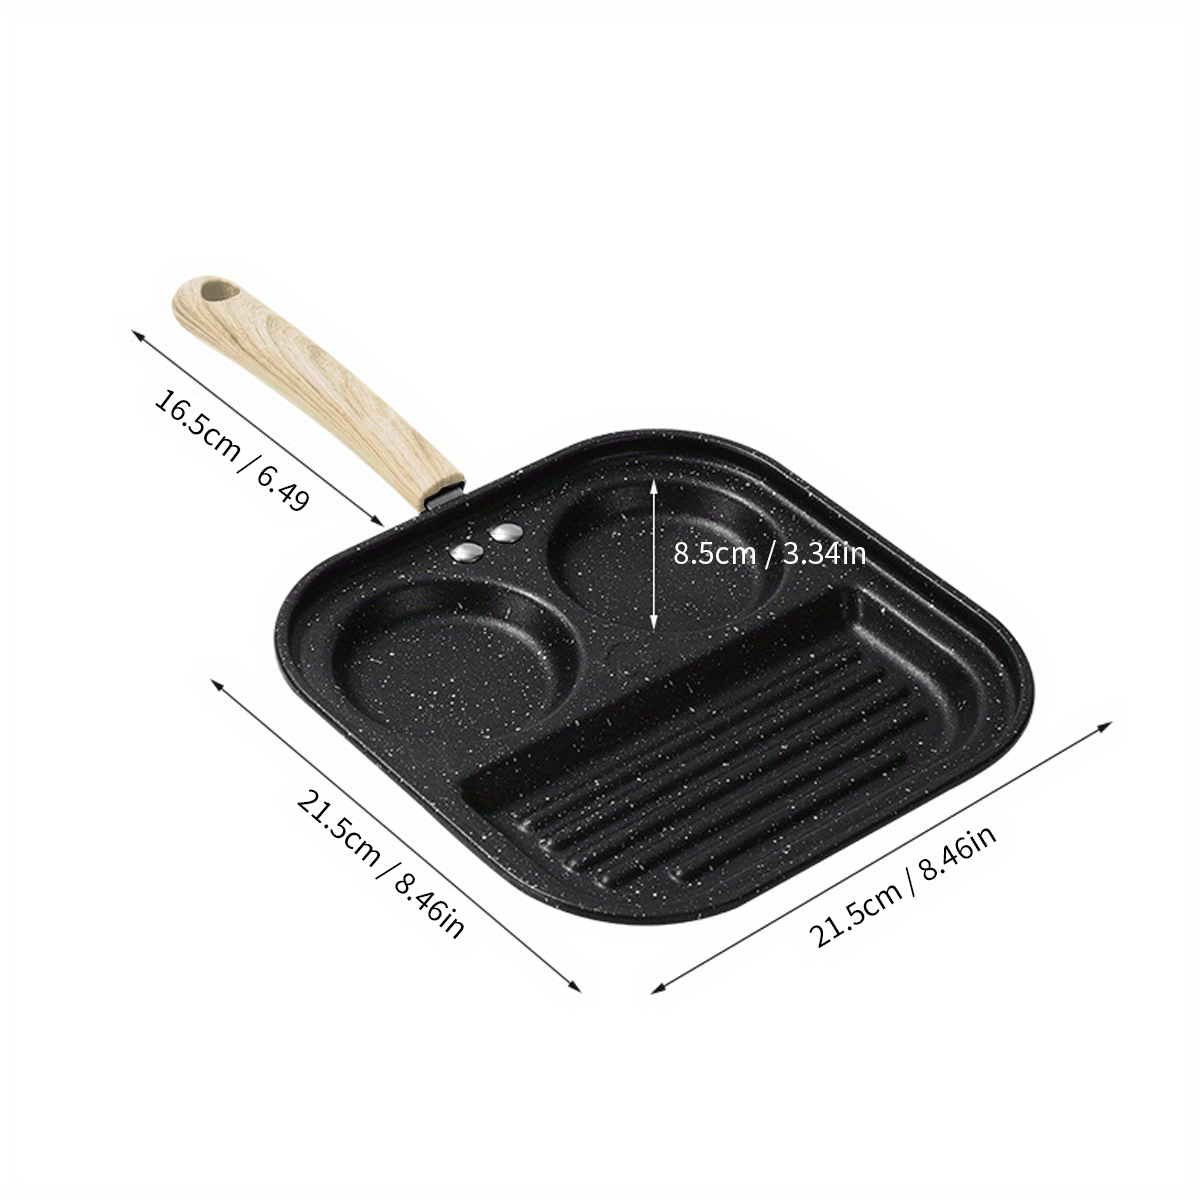 YJ Quail Egg Baking Pan, 16-Hole Cast Iron Non-Stick Pancake Baking Pan,  Uncoated Baking Pan, Suitable for Various Stoves, Gas Stoves, Ceramic